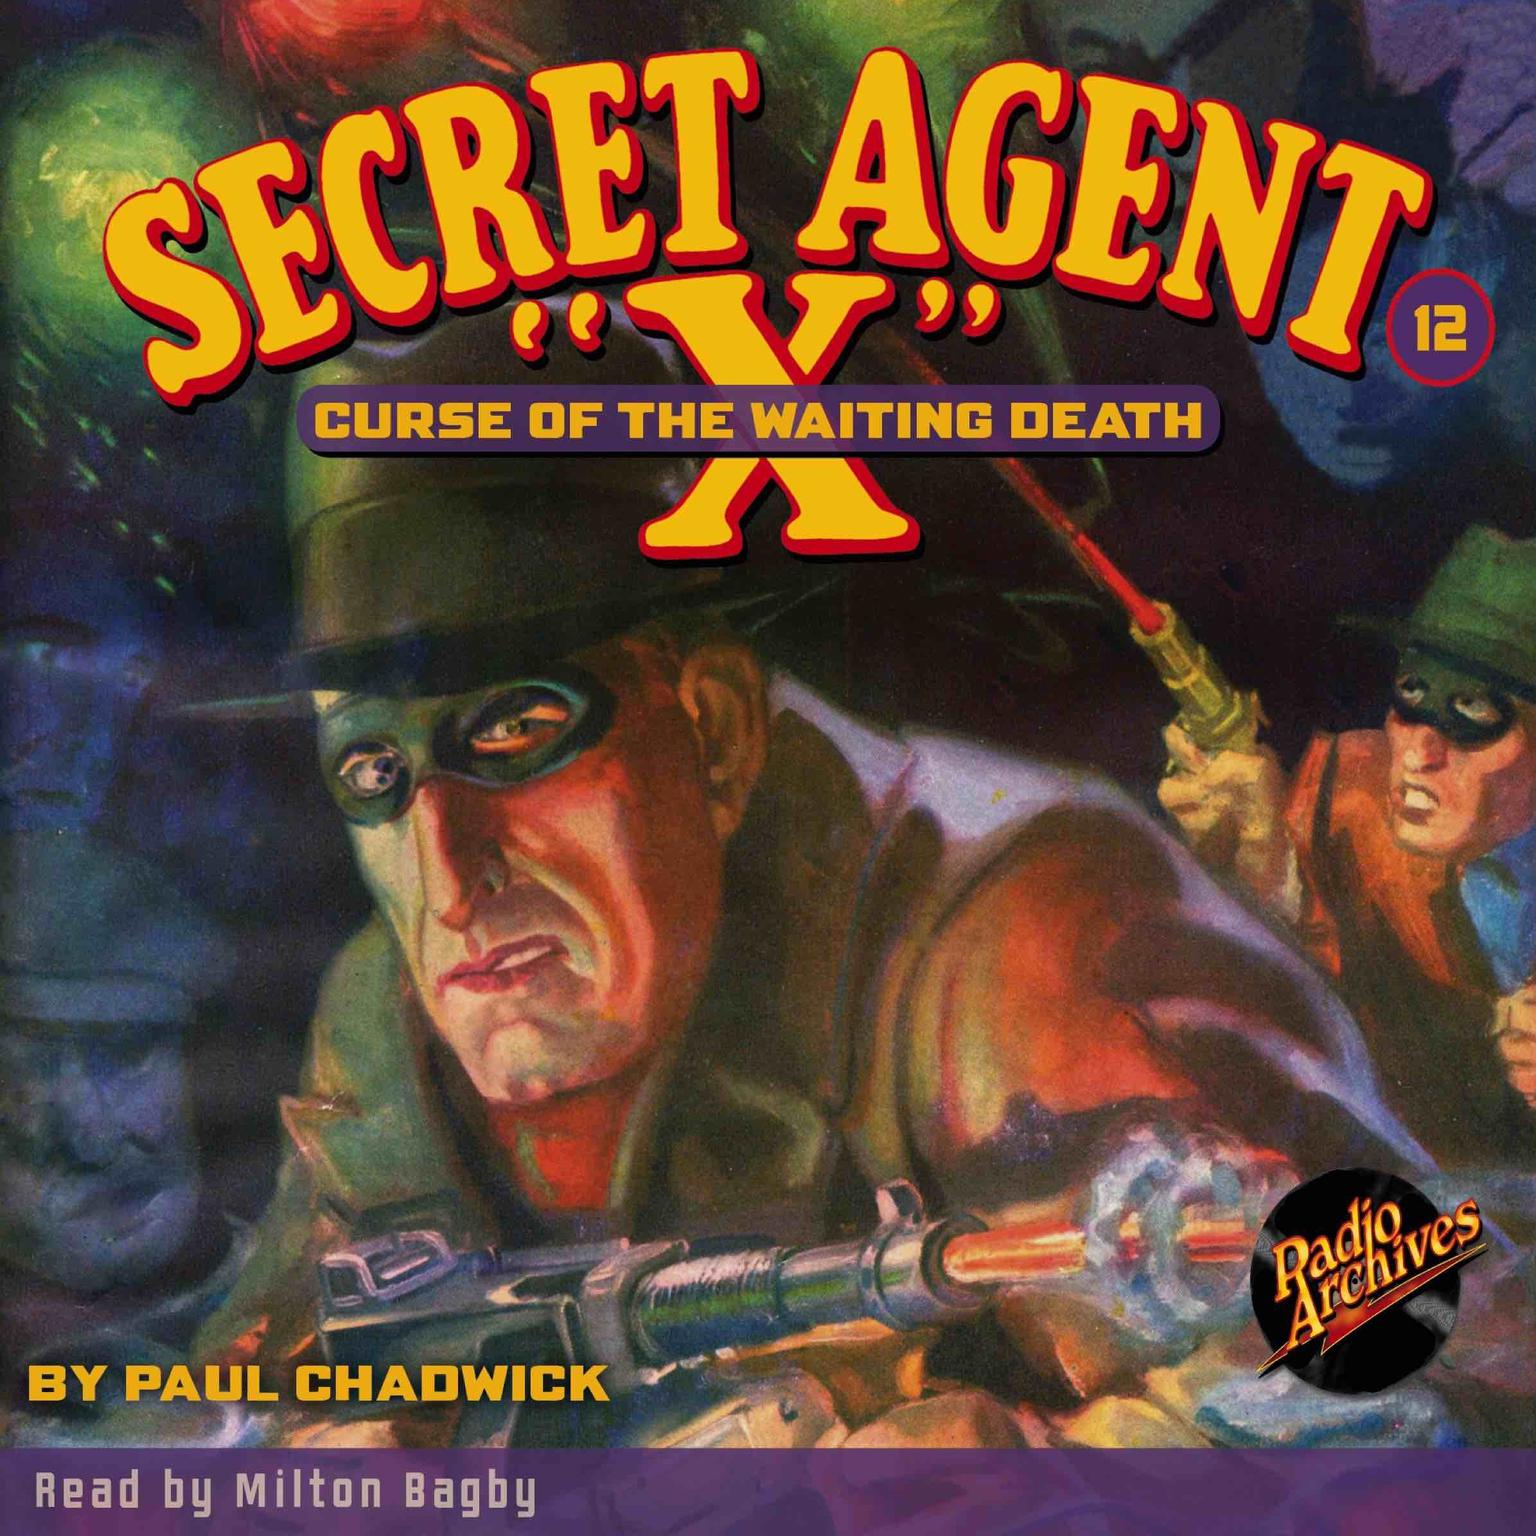 Secret Agent X #12: Curse of the Waiting Death Audiobook, by Paul Chadwick